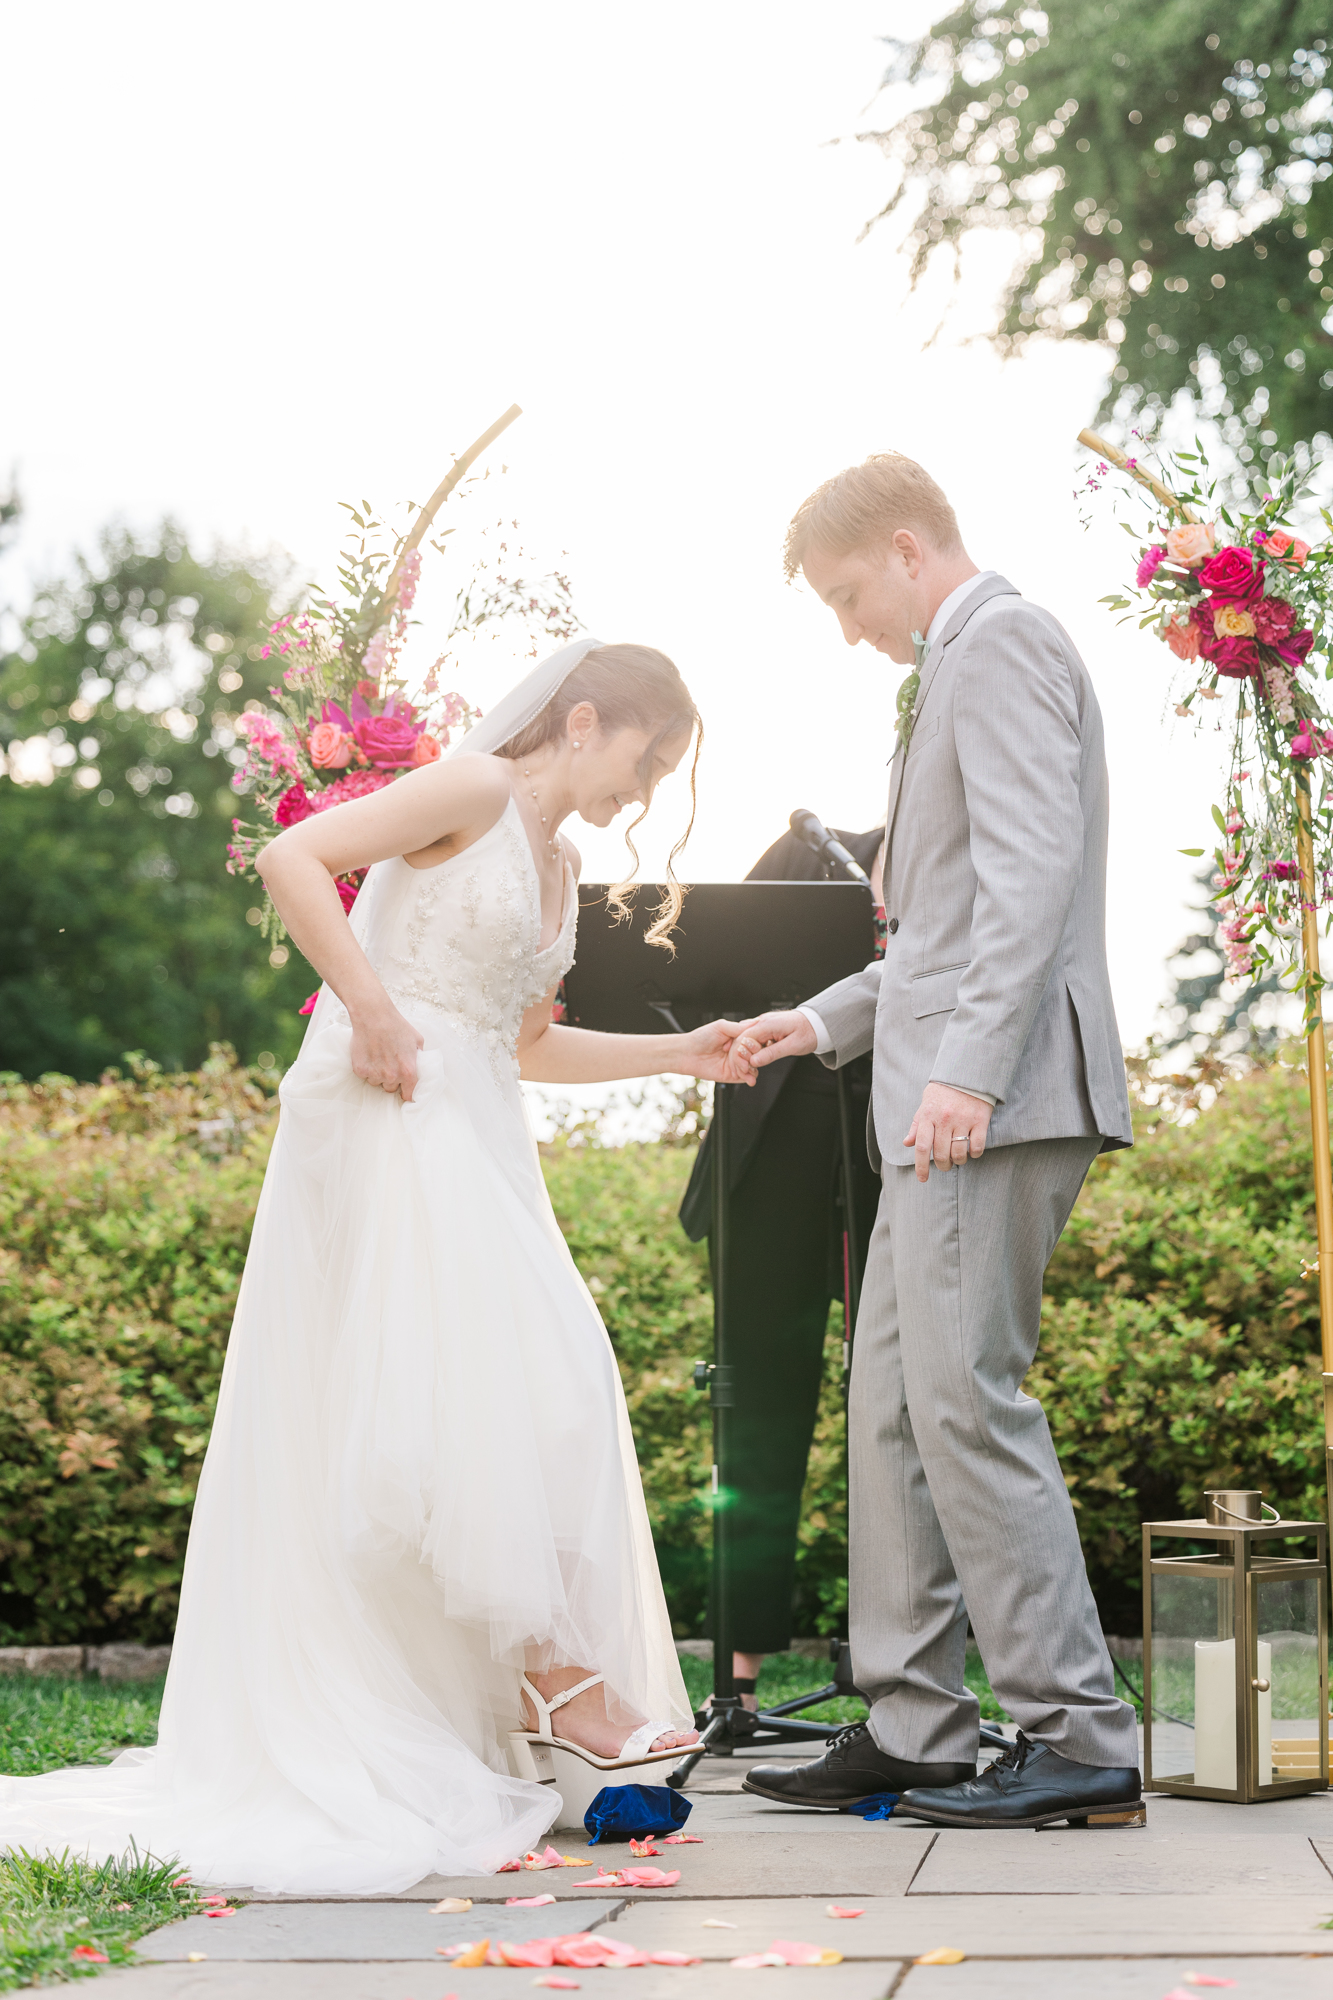 Charming Wedding at Briarcliff Manor in Summertime